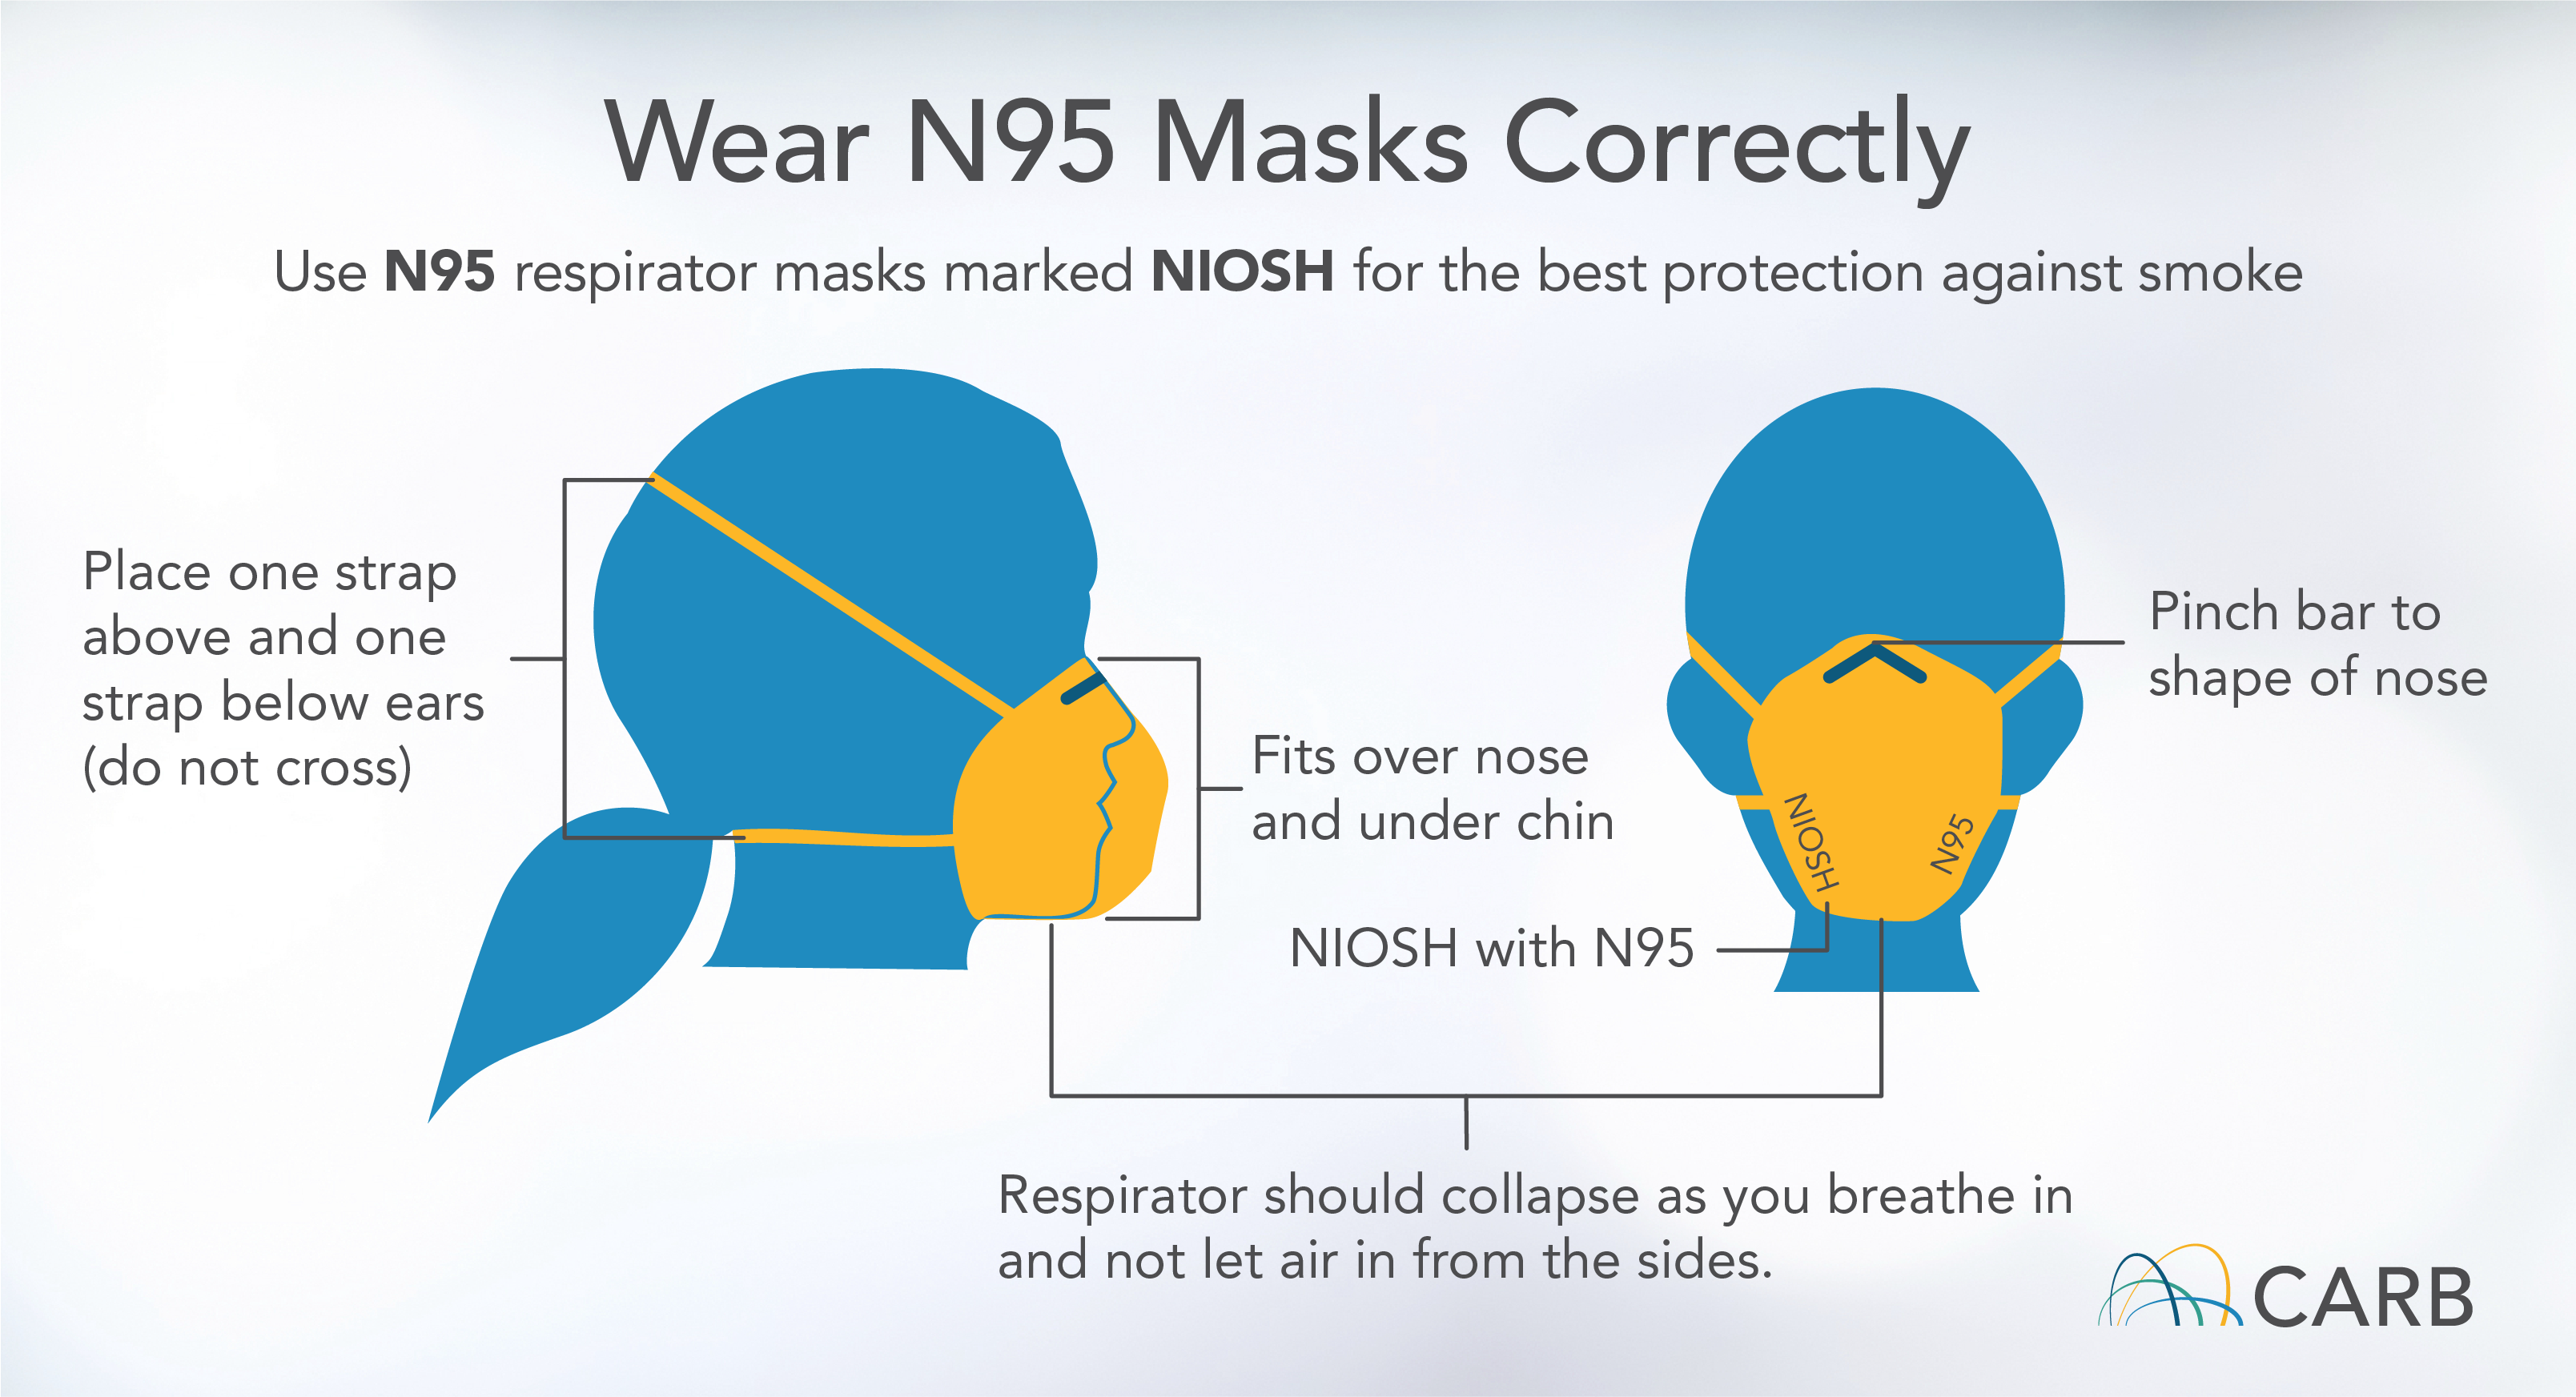 Wear N95 Masks Correctly: Use an N95 respirator masks marked NIOSH for the best protection against smoke. Place one strap above and one strap below ears (do not cross). Pinch bar to shape of nose. Fits over nose and under chin. NIOSH with N95. Respirator should collapse as you breathe in and not let air in from the sides.